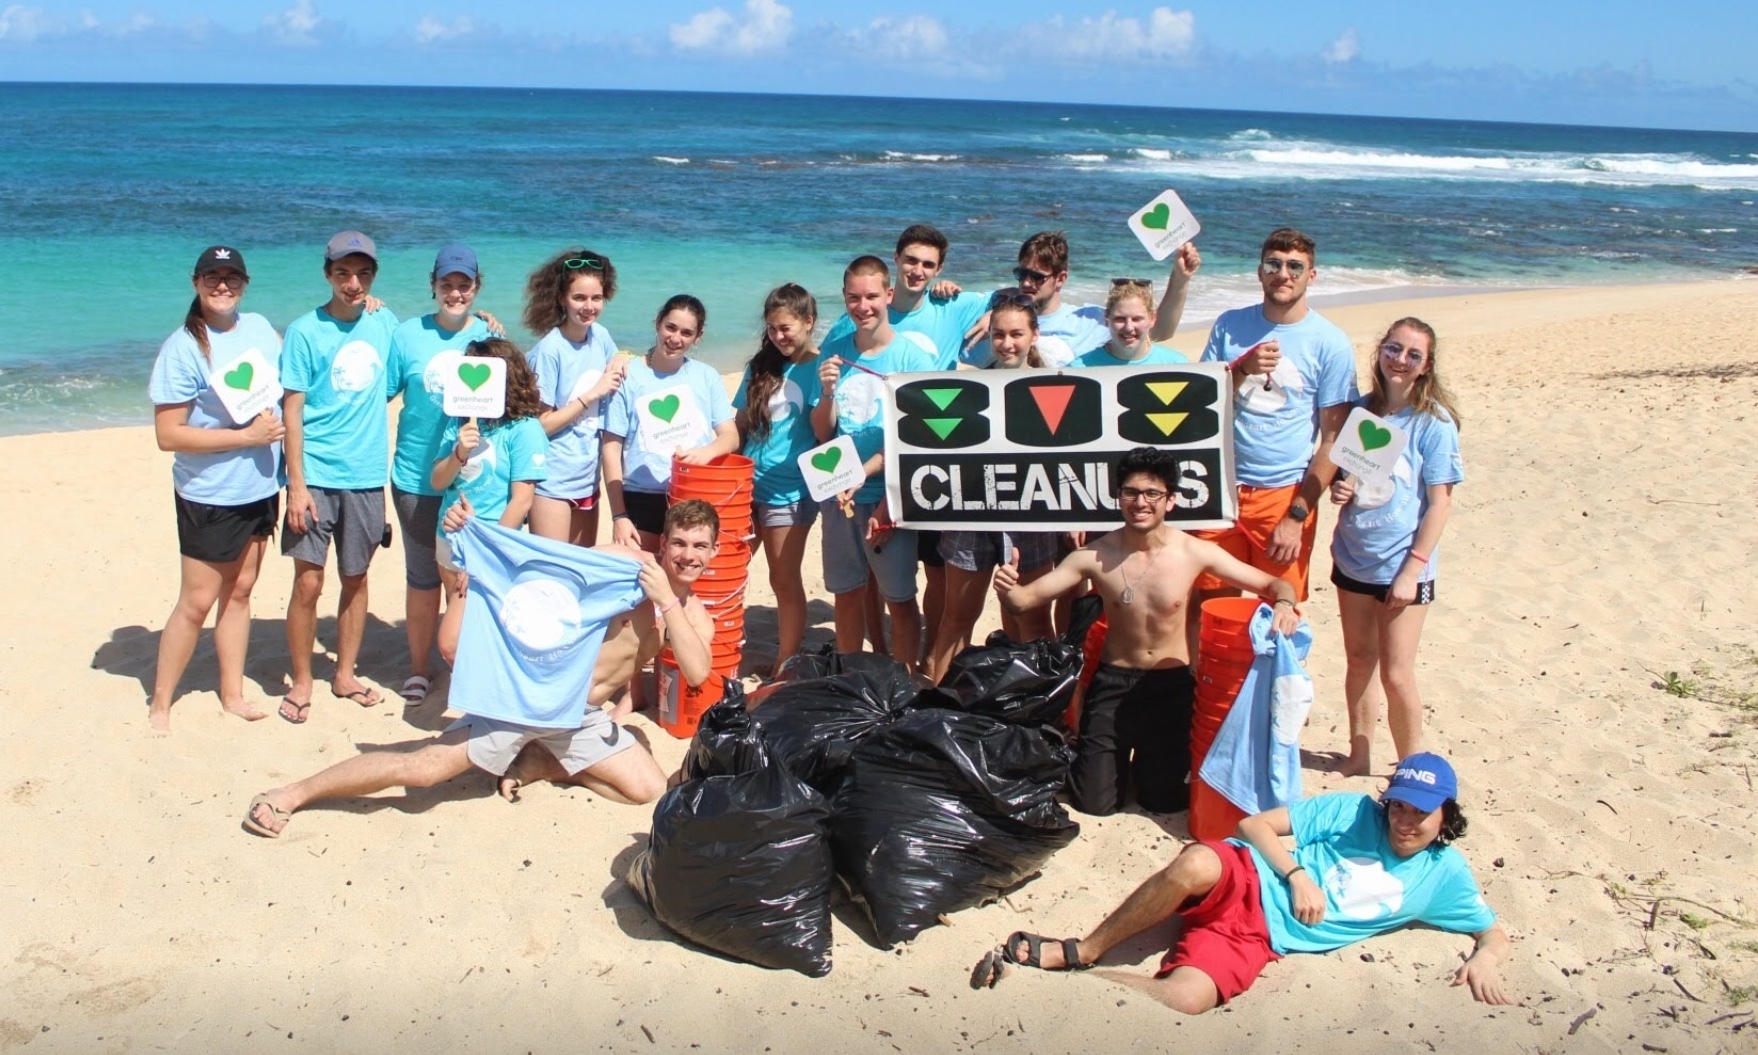 A large group of students stand on the beach in front of bright blue water with bags of trash.